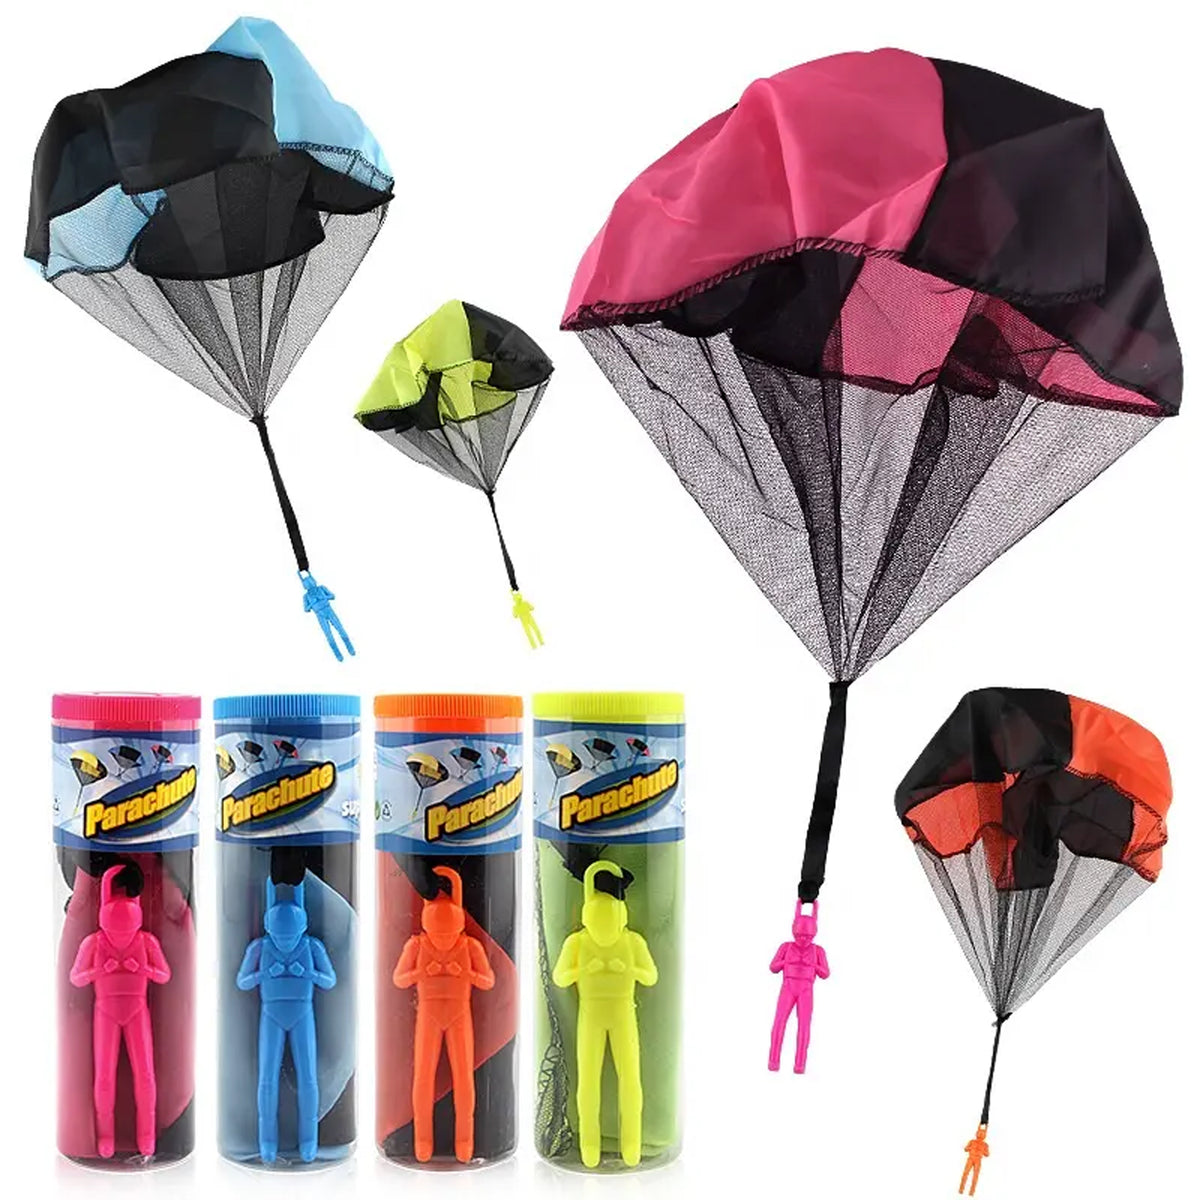 Adventure with Our Mini Parachute Throwing Fun Toy for Kids